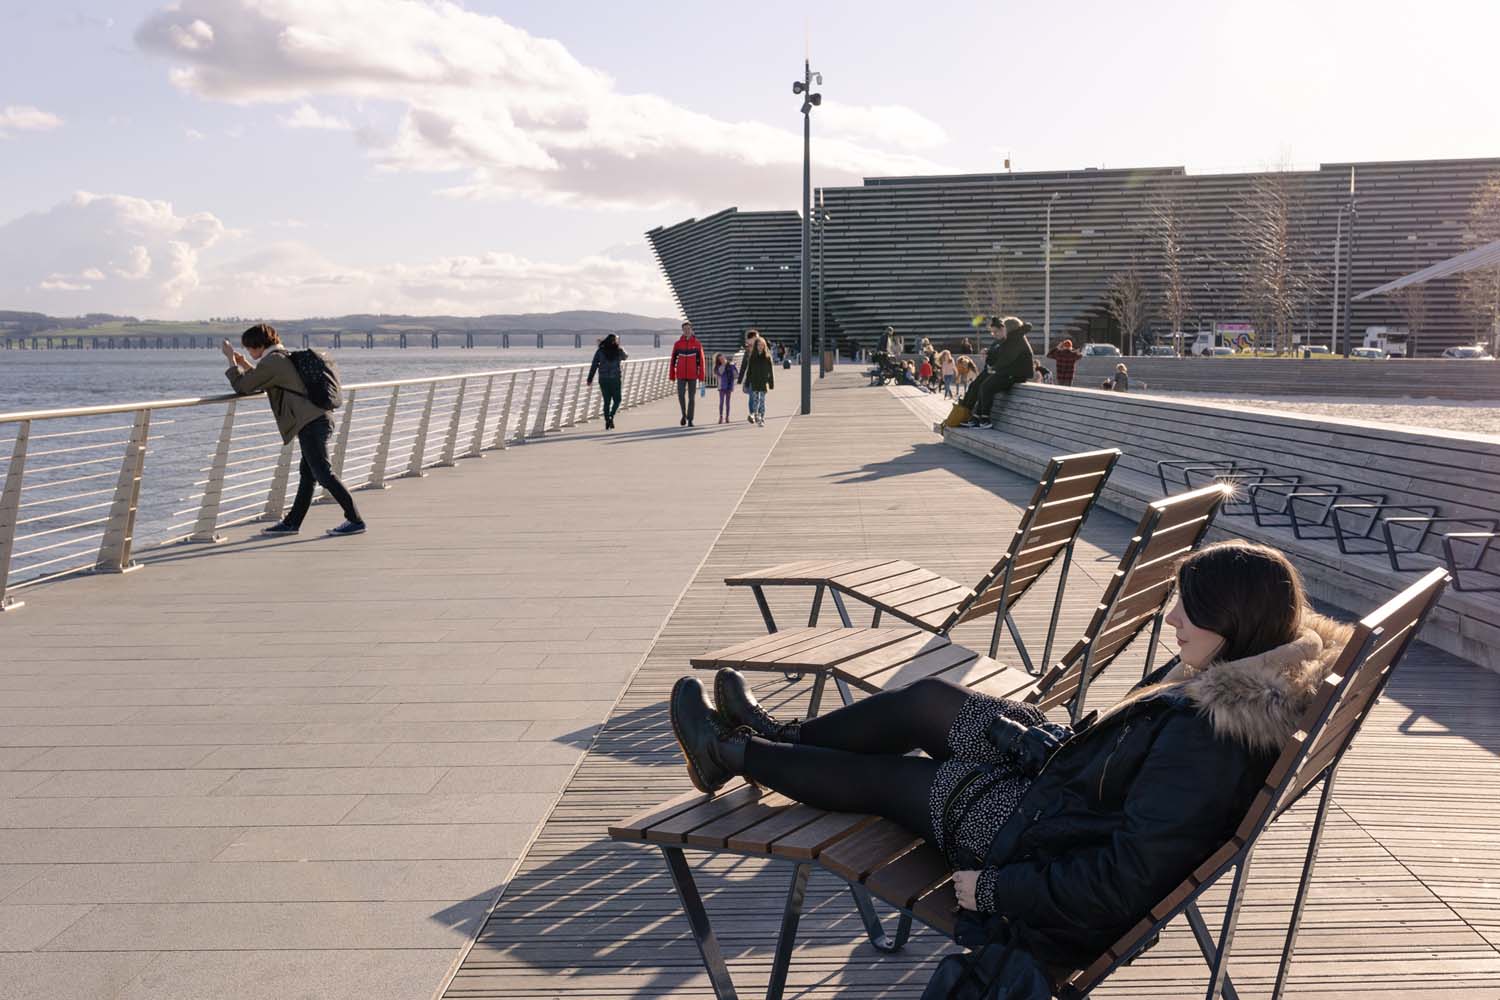 A photograph of the river front in Dundee with V&A Dundee in the background and a woman relaxing on a lounger in the sunshine, and a man looking across the Tay